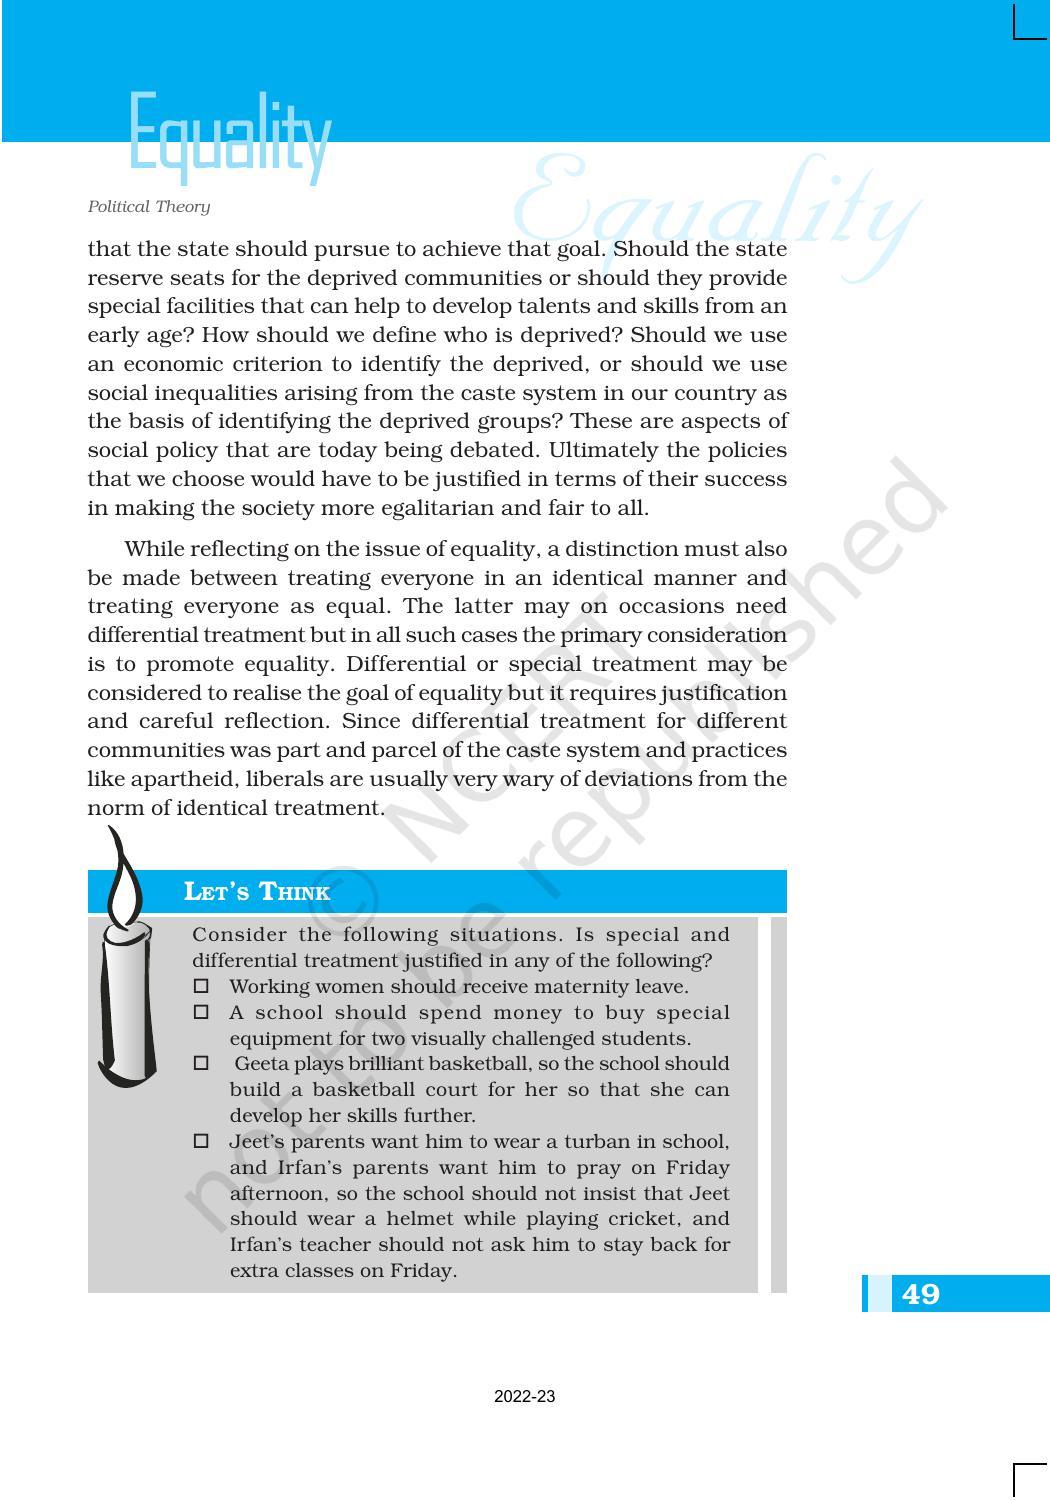 NCERT Book for Class 11 Political Science (Political Theory) Chapter 3 Equality - Page 19